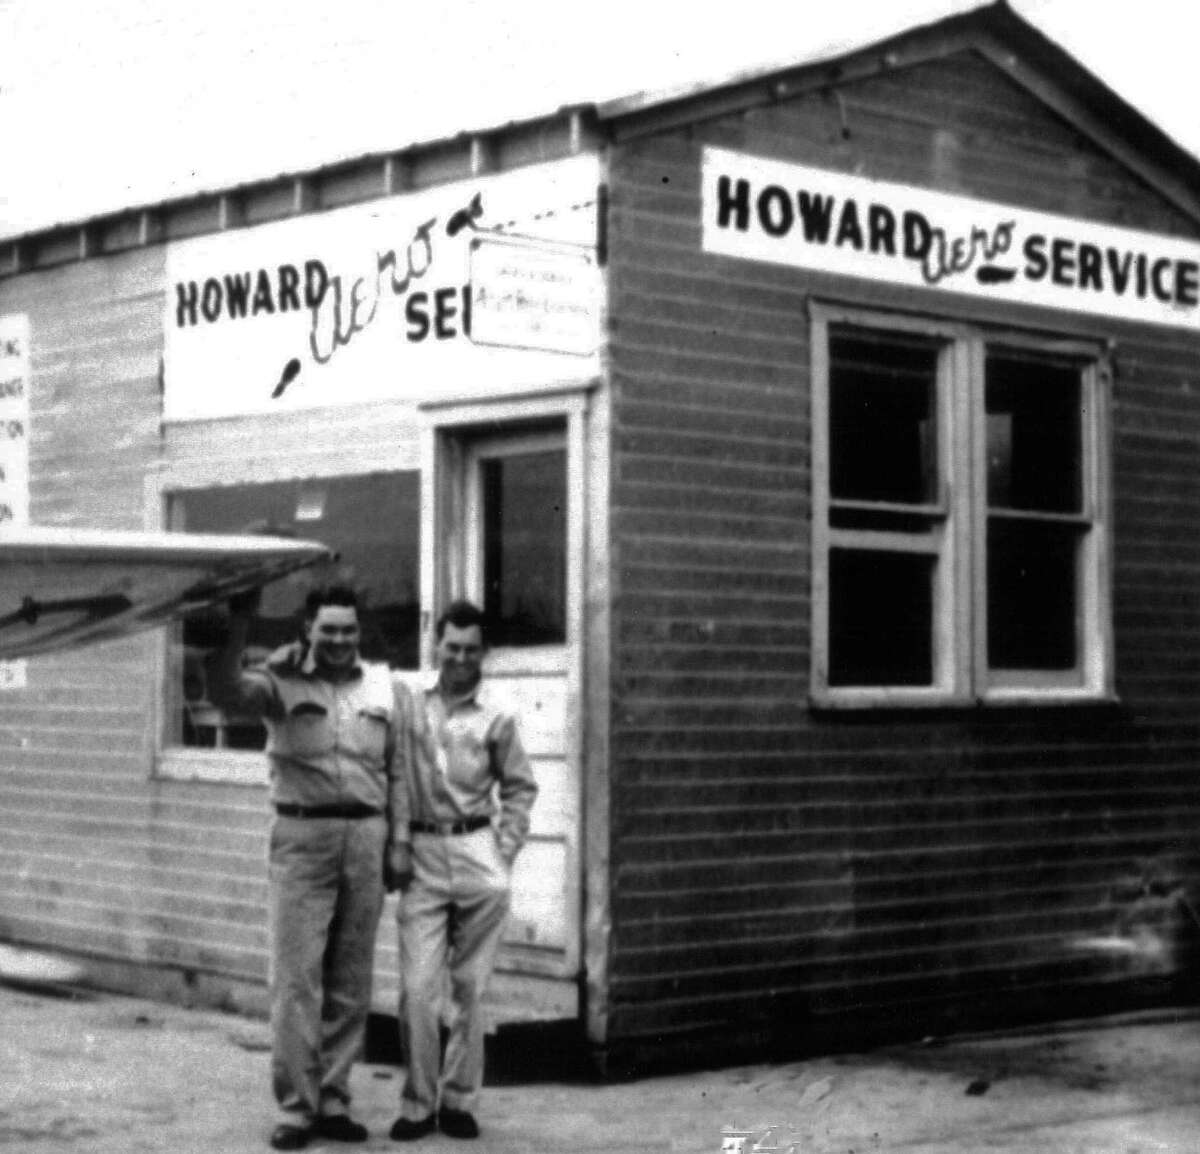 The first building for Howard Aero Service.